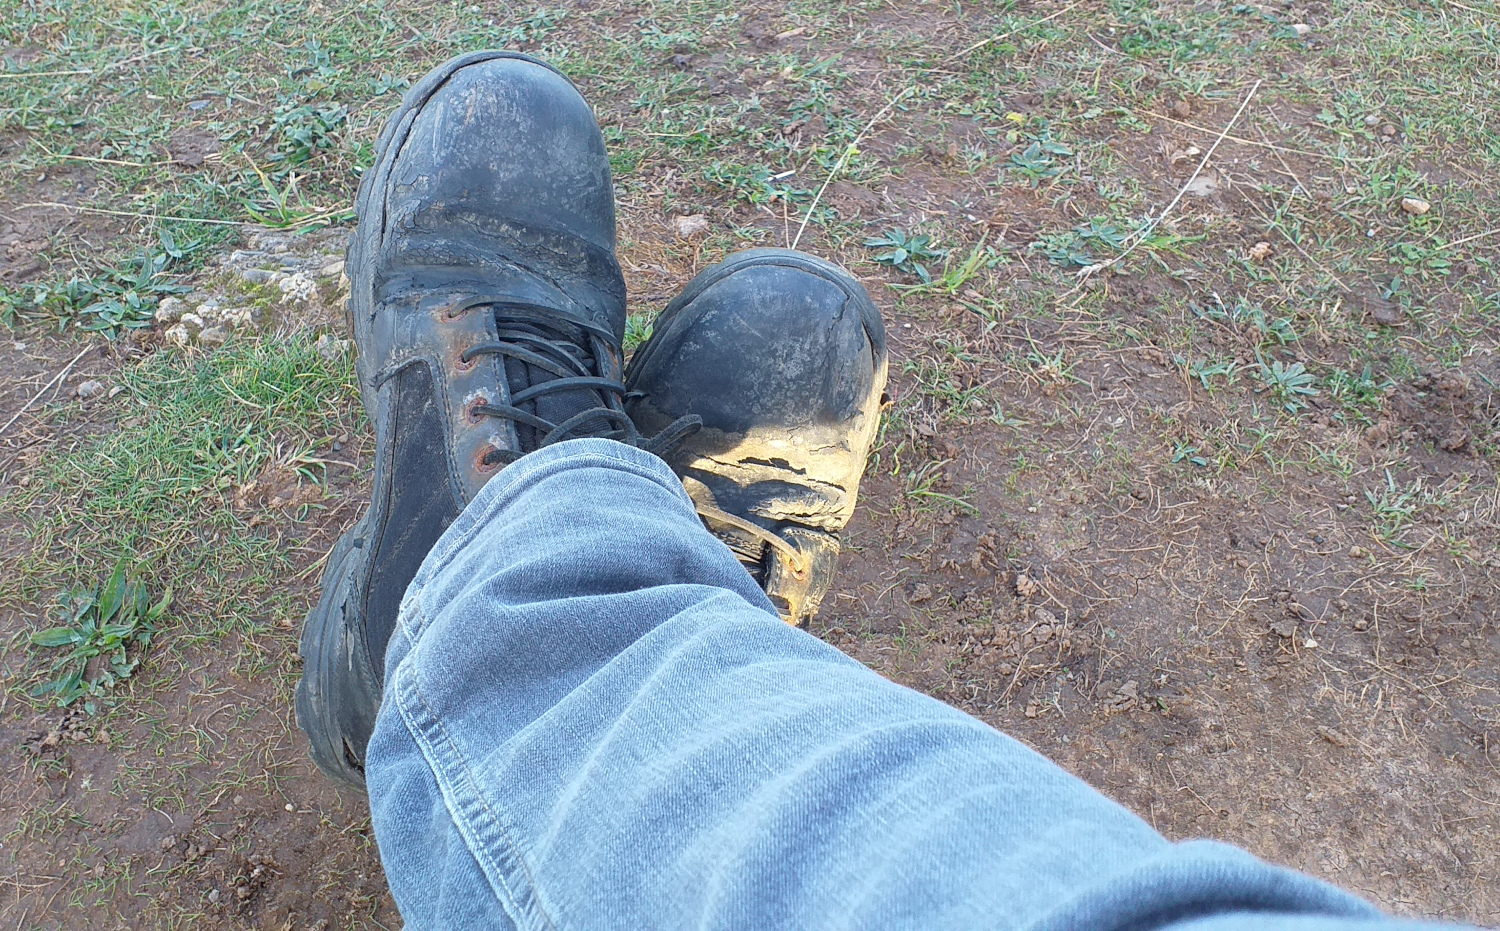 This is what my 2-year-old X-Hiking hiking boots looked like on their last outing.